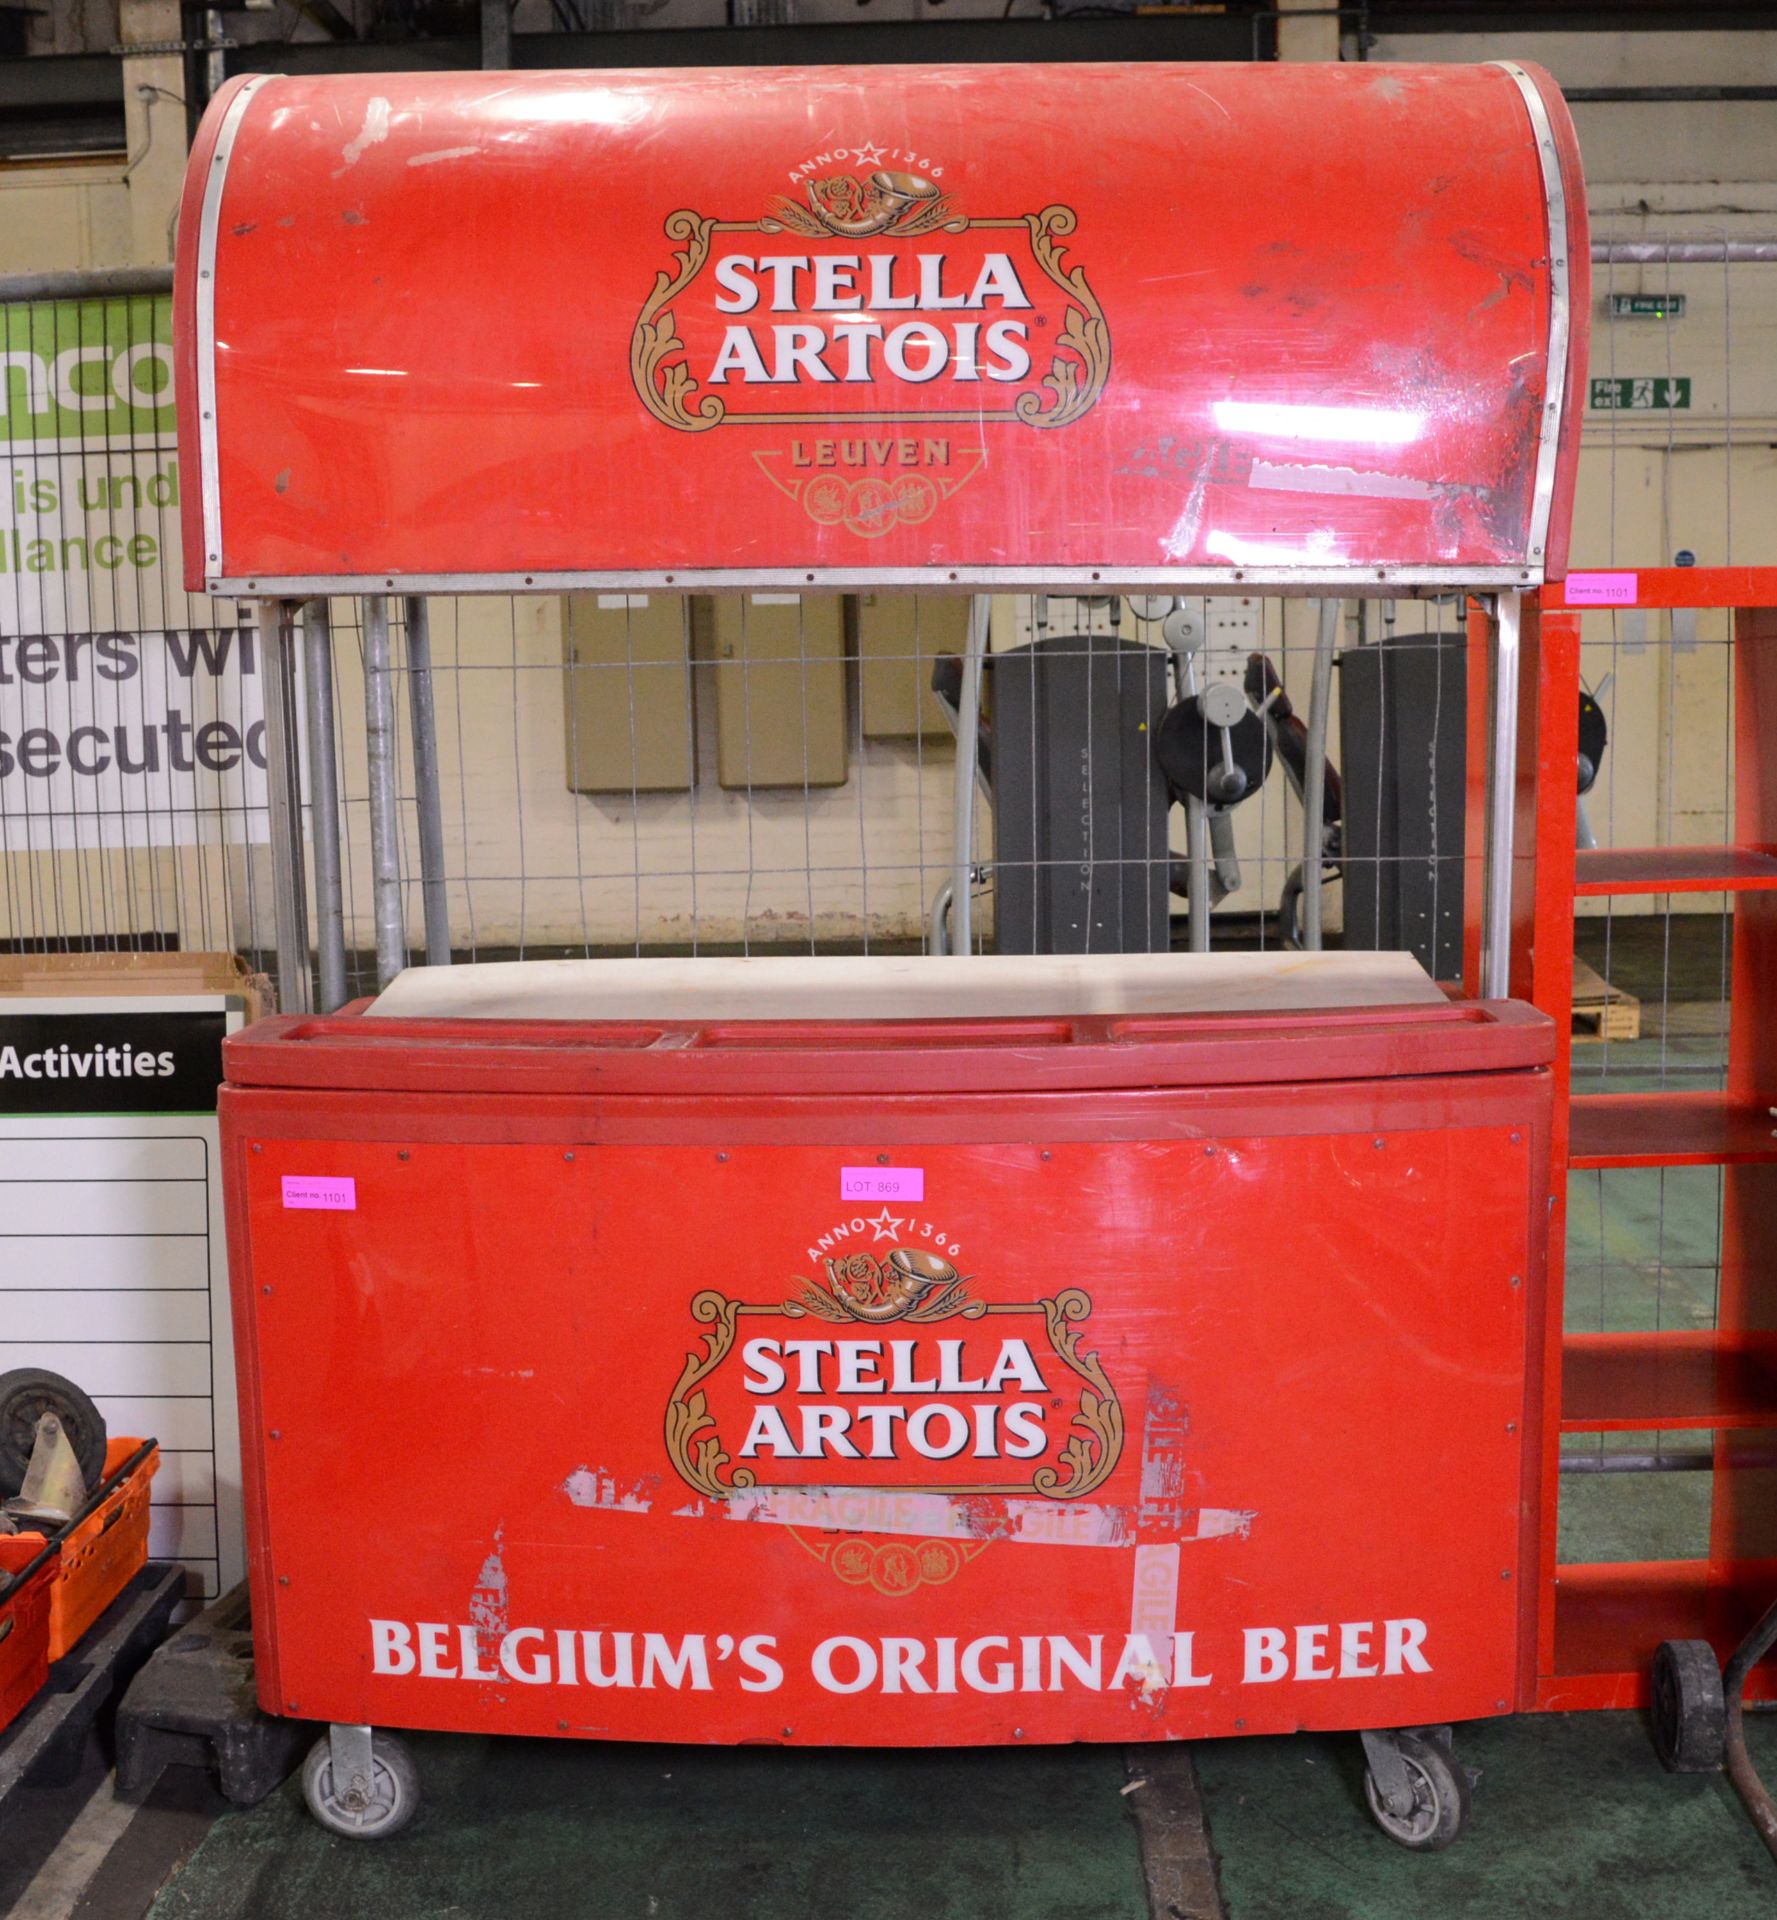 Stella Artois Bar with Canopy - Not refrigerated.